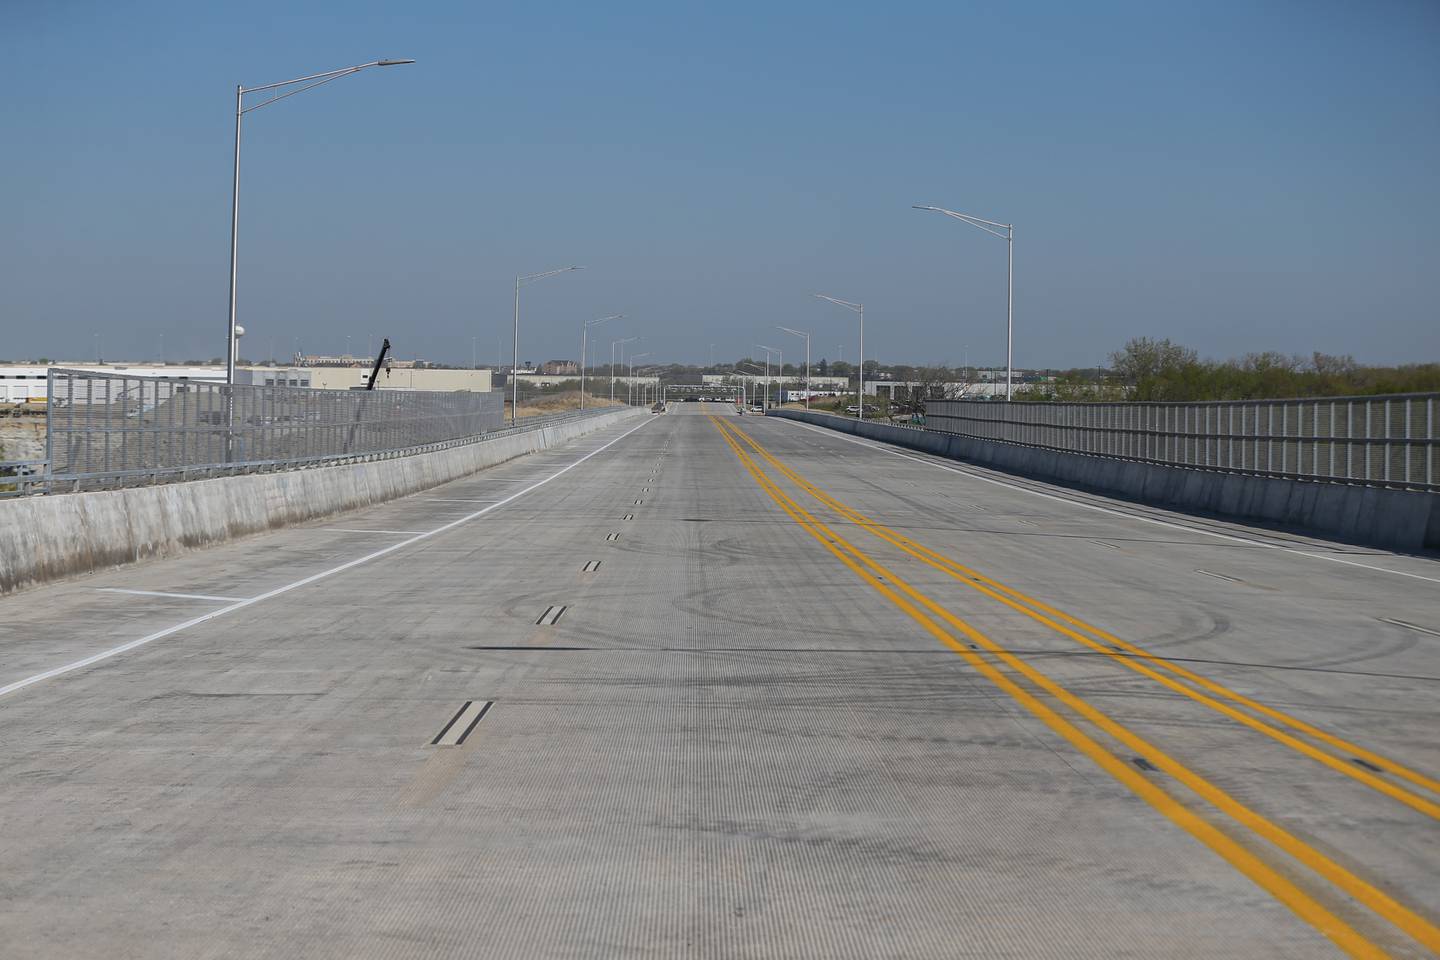 Picture from the Houbolt Road bridge. April 27, 2023.